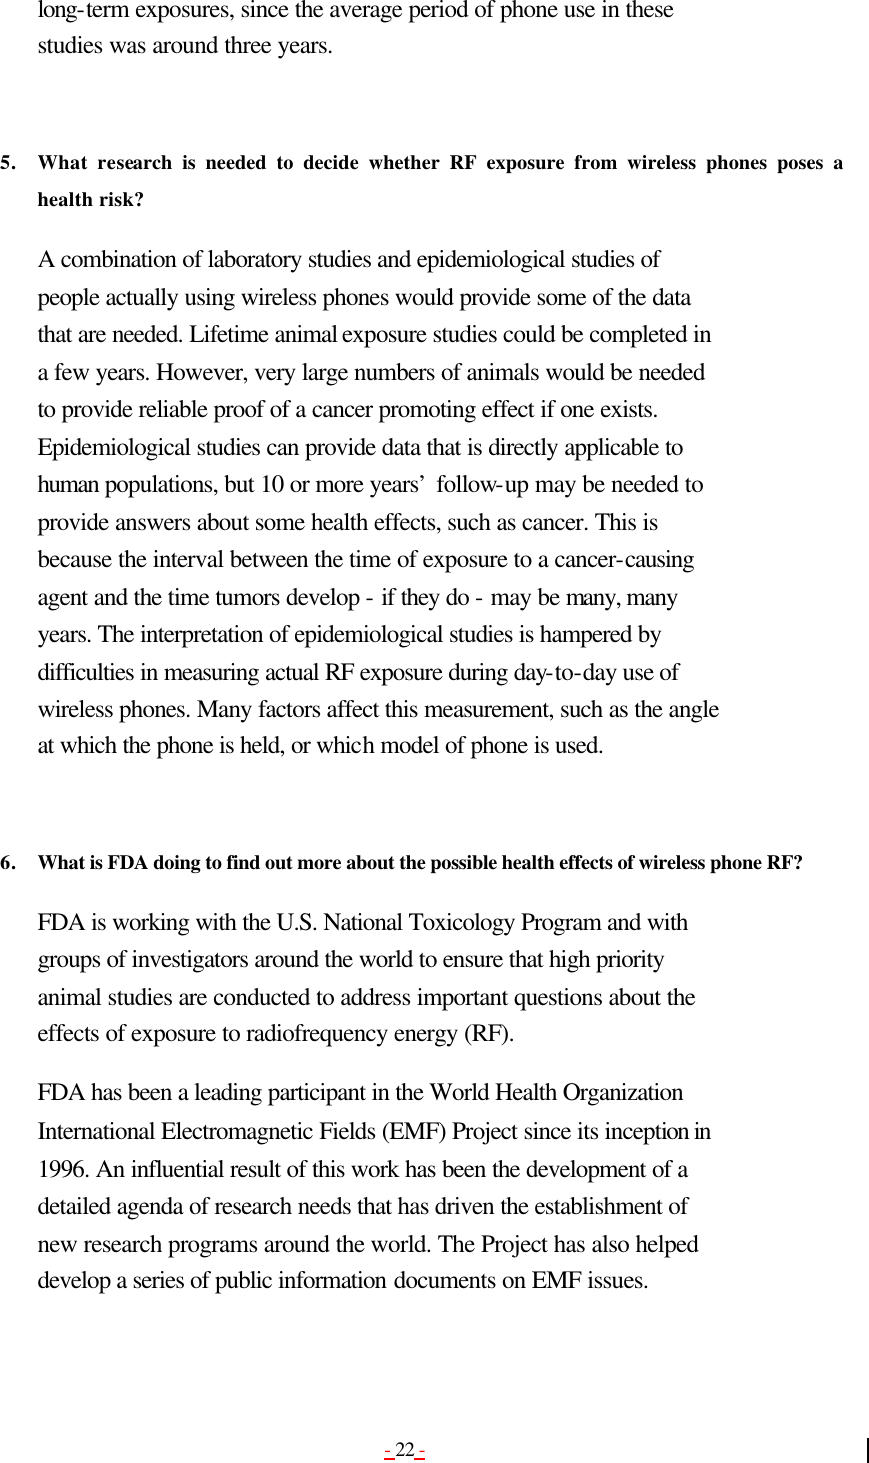 - 22 - long-term exposures, since the average period of phone use in these studies was around three years.   5. What research is needed to decide whether RF exposure from wireless phones poses a health risk?  A combination of laboratory studies and epidemiological studies of people actually using wireless phones would provide some of the data that are needed. Lifetime animal exposure studies could be completed in a few years. However, very large numbers of animals would be needed to provide reliable proof of a cancer promoting effect if one exists. Epidemiological studies can provide data that is directly applicable to human populations, but 10 or more years’ follow-up may be needed to provide answers about some health effects, such as cancer. This is because the interval between the time of exposure to a cancer-causing agent and the time tumors develop - if they do - may be many, many years. The interpretation of epidemiological studies is hampered by difficulties in measuring actual RF exposure during day-to-day use of wireless phones. Many factors affect this measurement, such as the angle at which the phone is held, or which model of phone is used.   6. What is FDA doing to find out more about the possible health effects of wireless phone RF?  FDA is working with the U.S. National Toxicology Program and with groups of investigators around the world to ensure that high priority animal studies are conducted to address important questions about the effects of exposure to radiofrequency energy (RF). FDA has been a leading participant in the World Health Organization International Electromagnetic Fields (EMF) Project since its inception in 1996. An influential result of this work has been the development of a detailed agenda of research needs that has driven the establishment of new research programs around the world. The Project has also helped develop a series of public information documents on EMF issues. 